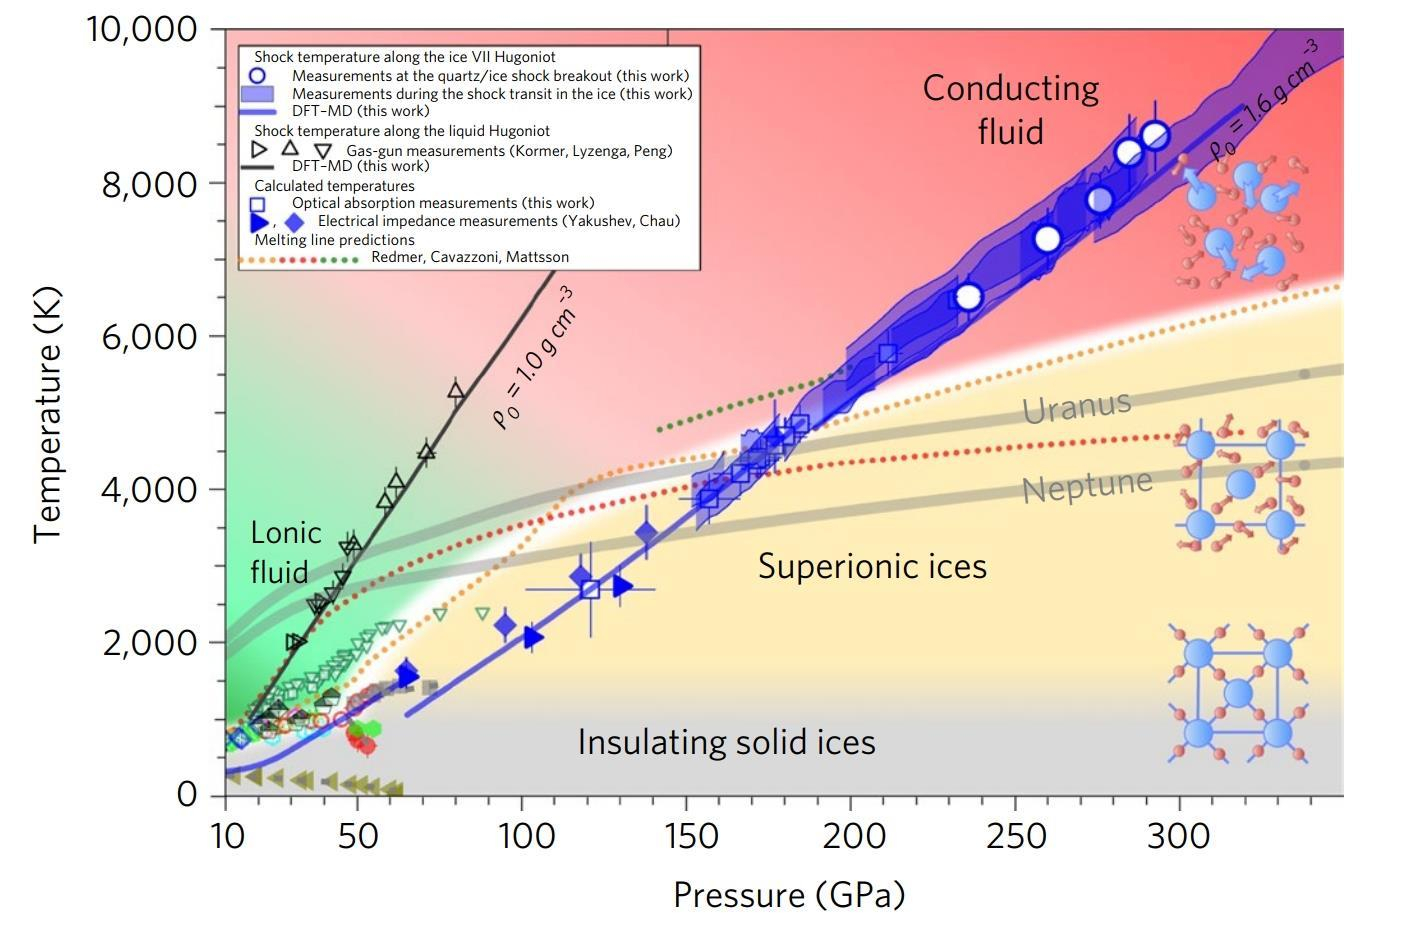 Water Phase Diagram Glimpse Of Waters Superionic State May Explain Icy Giants Oddities